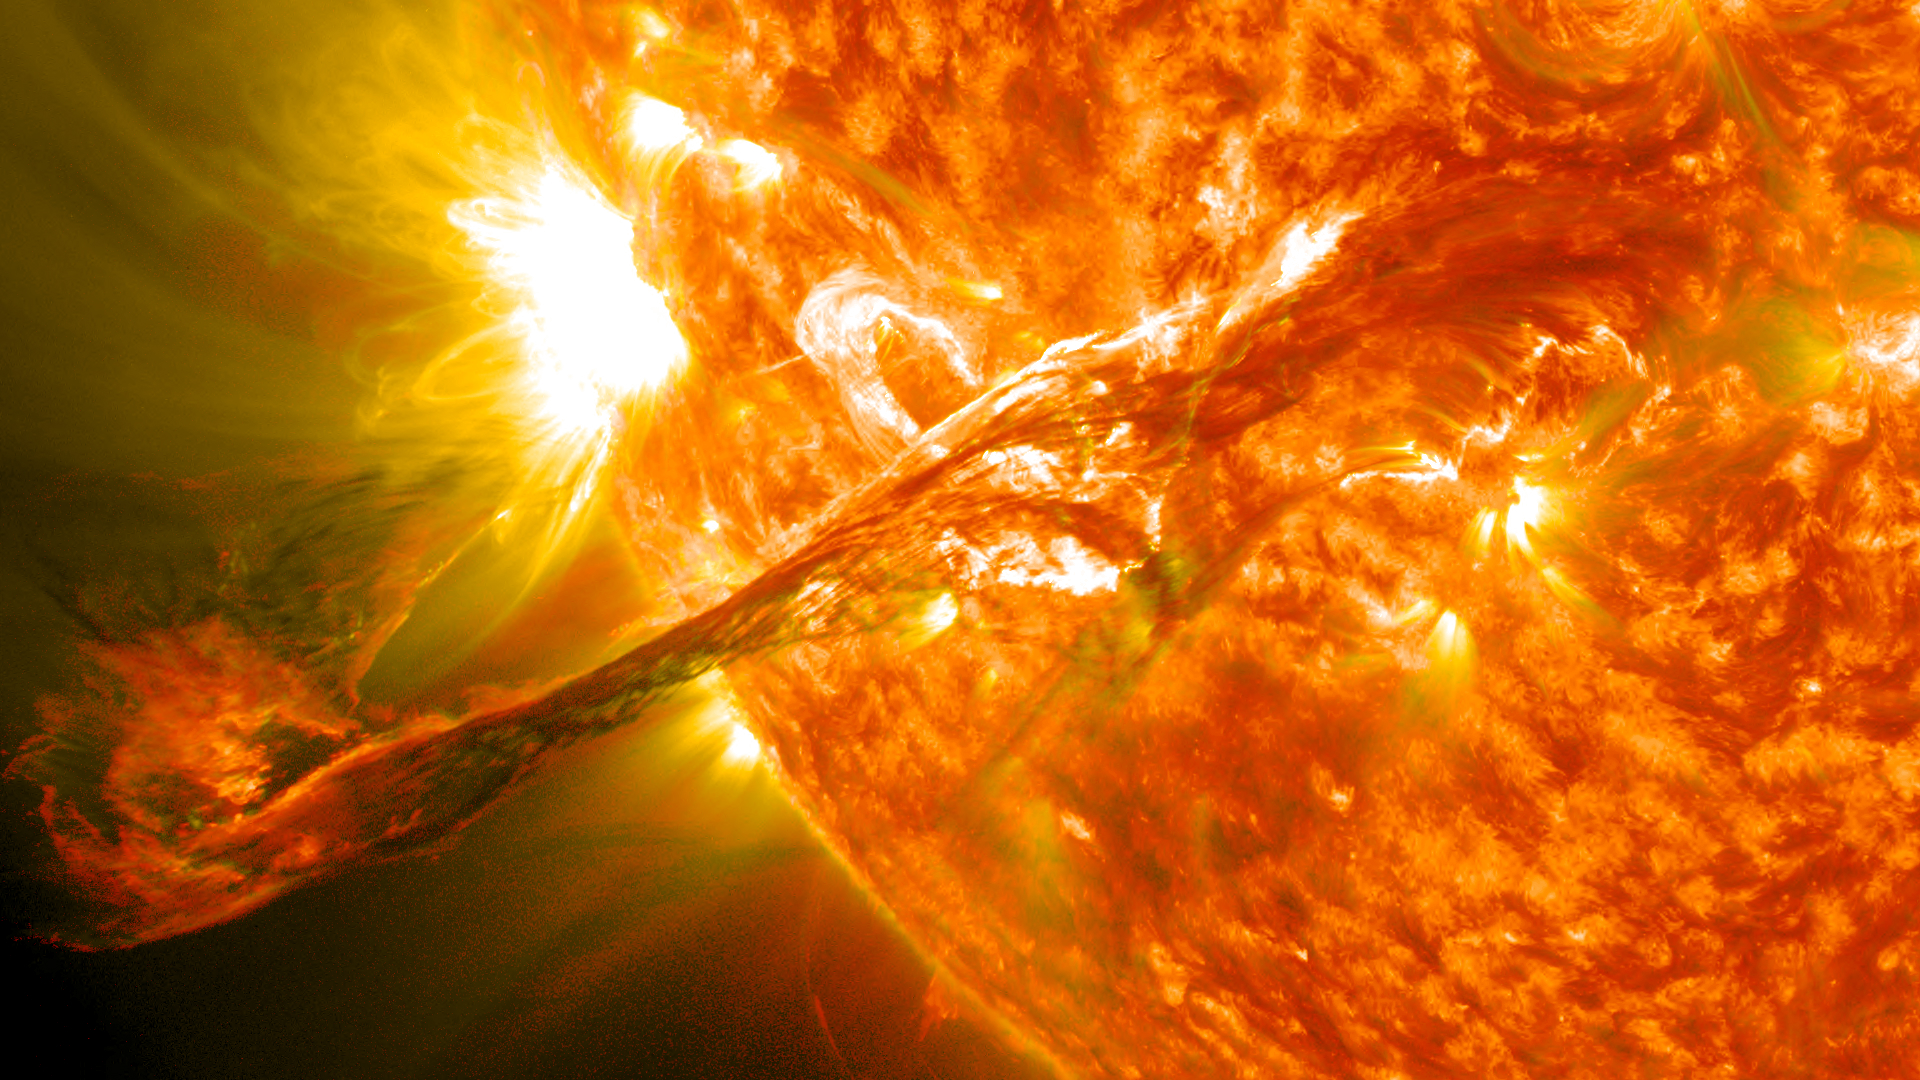 A new type of wave has been discovered on the surface of the sun